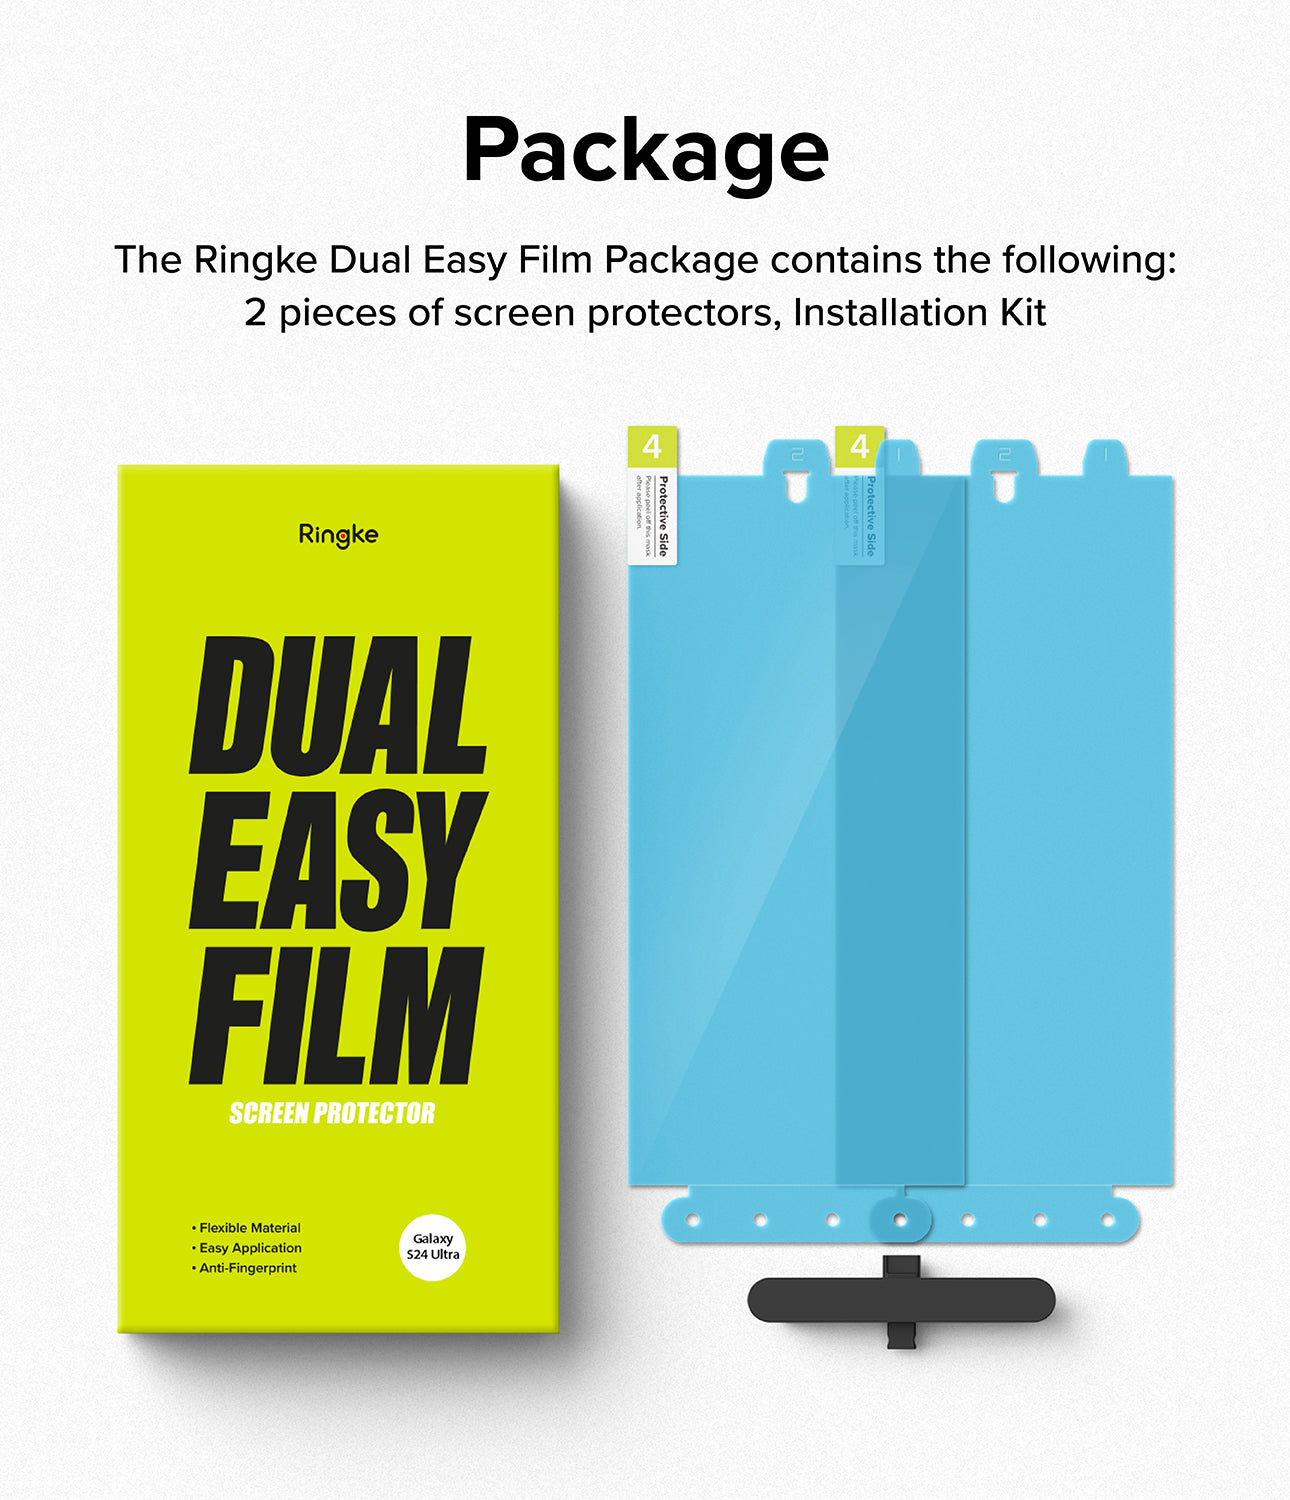 Galaxy S24 Ultra Screen Protector | Dual Easy Film [2 Pack] - Package.